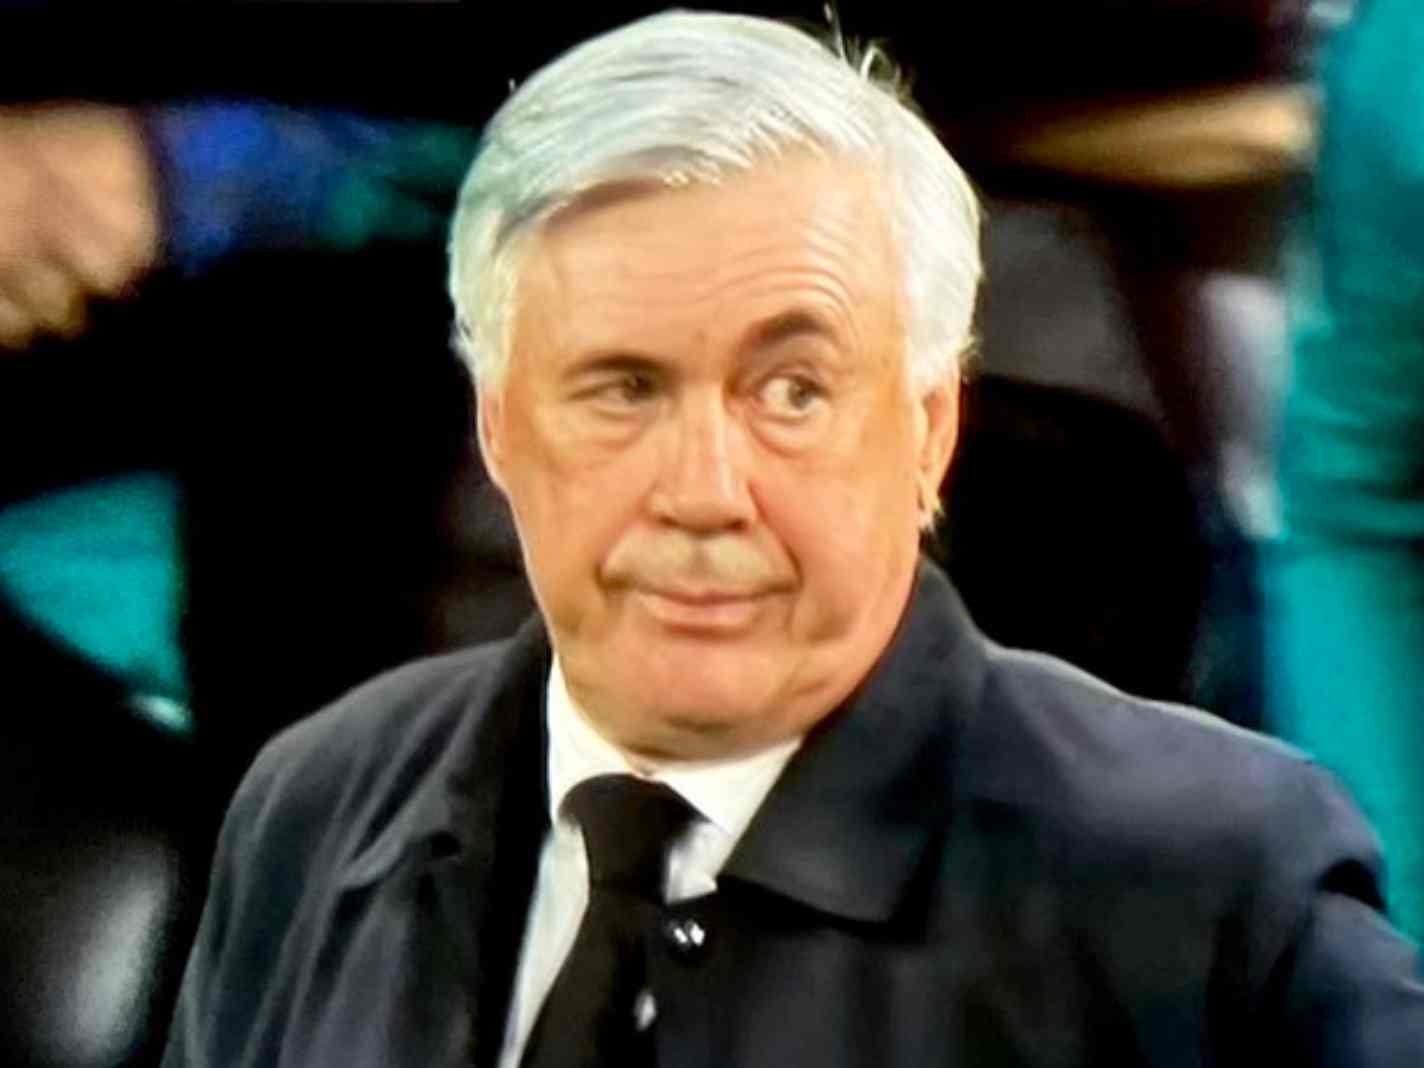 The image shows Carlo Ancelotti with his left eyebrow raised. The pose symbolizes Real Madrid's comeback wins in the Champions League.